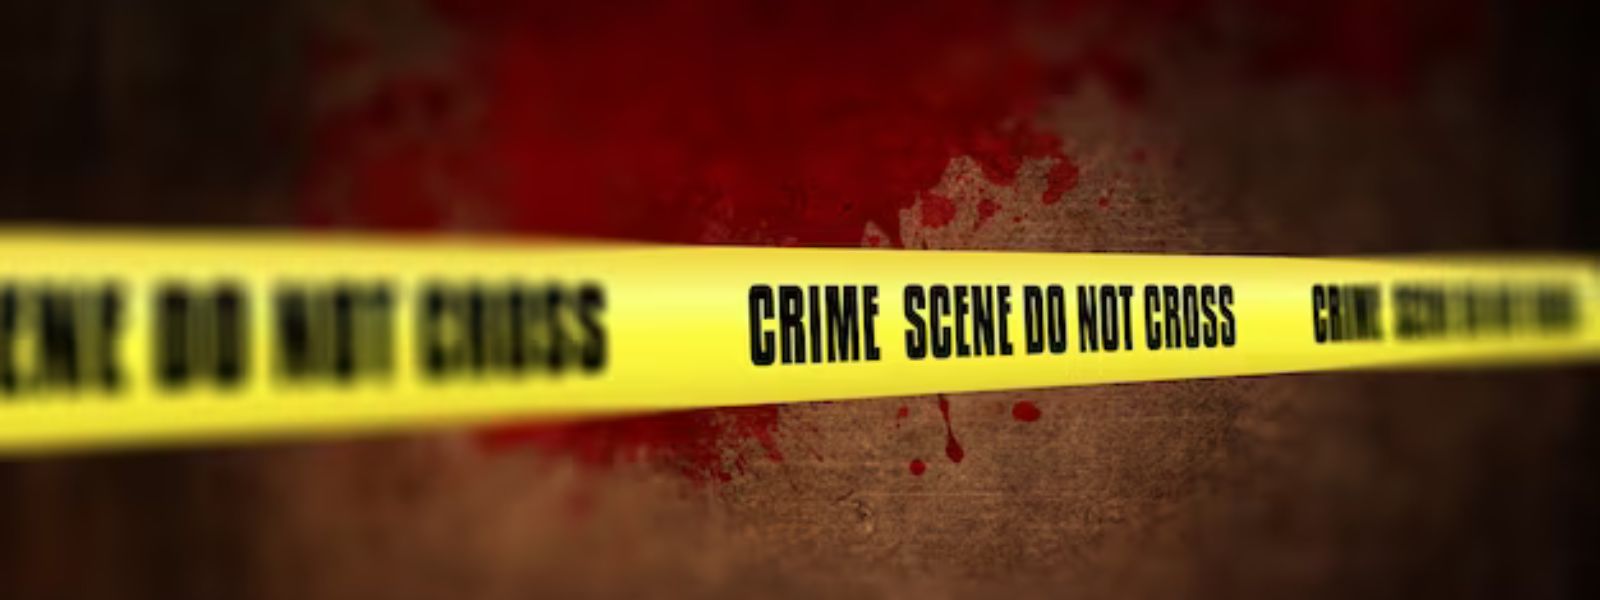 2 murders reported from Gampaha and Ambalanthota